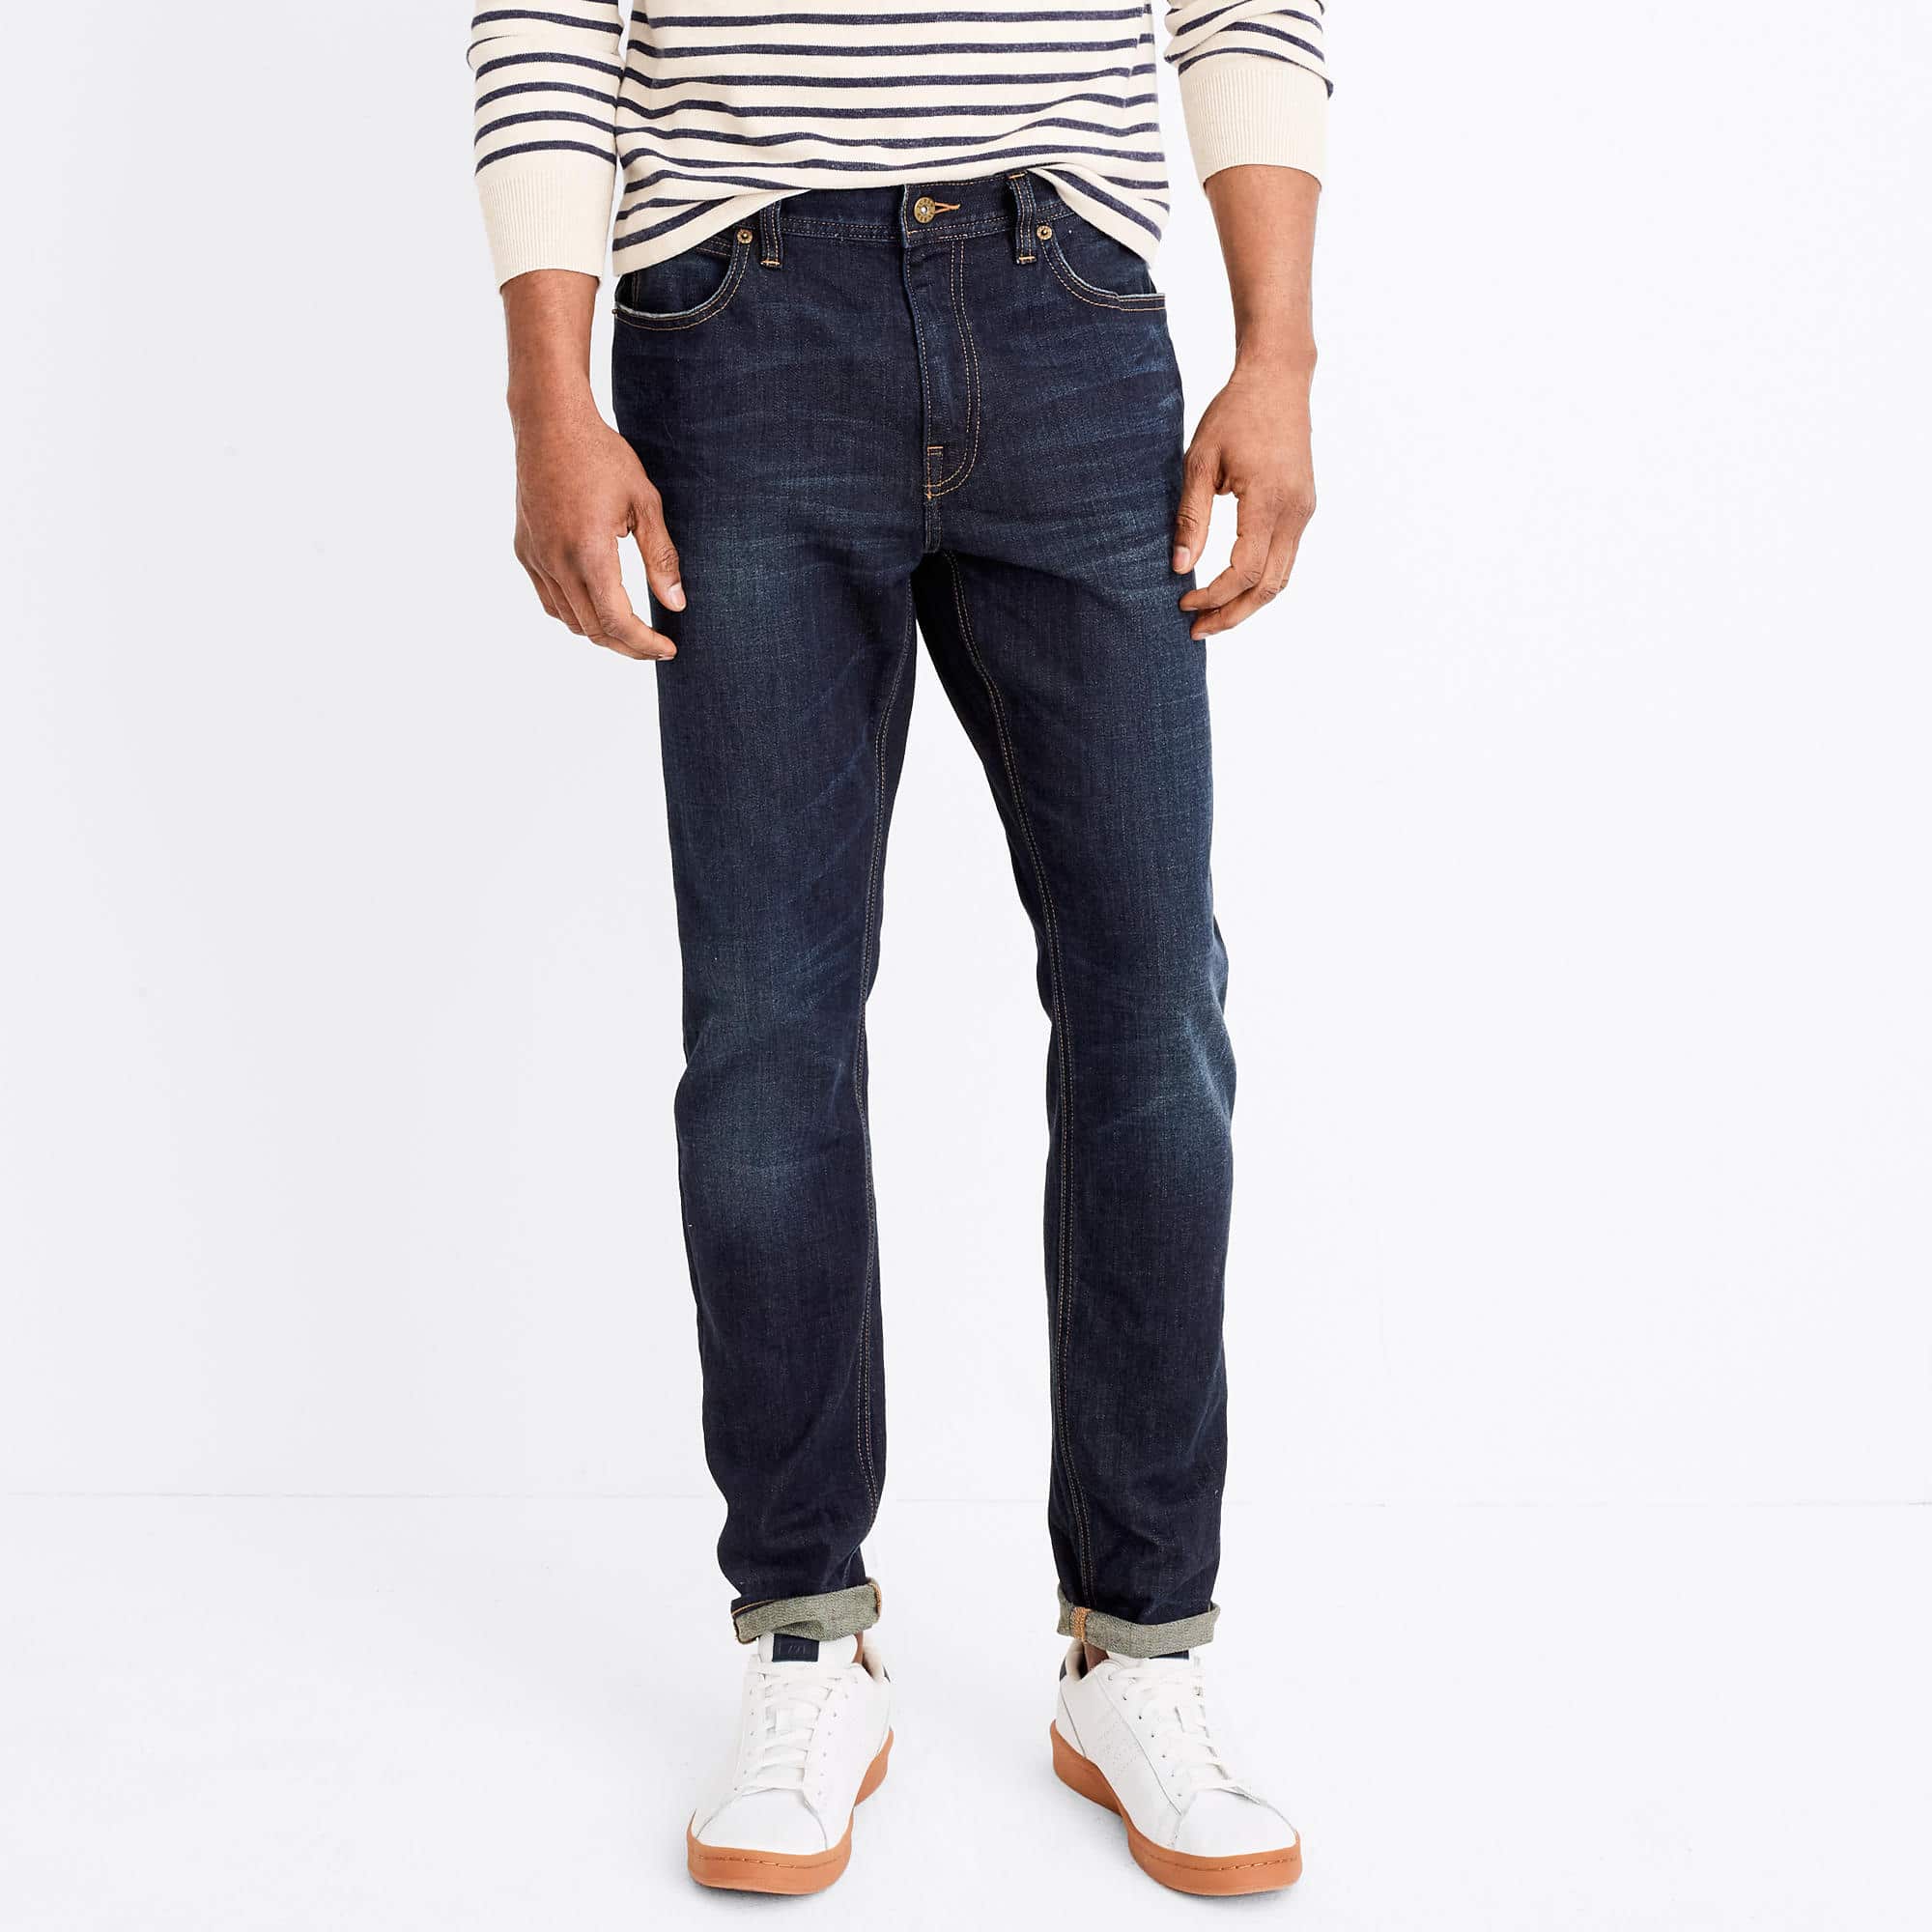 New Mens Jeans 2017: J. Crew for Fall Winter 2018